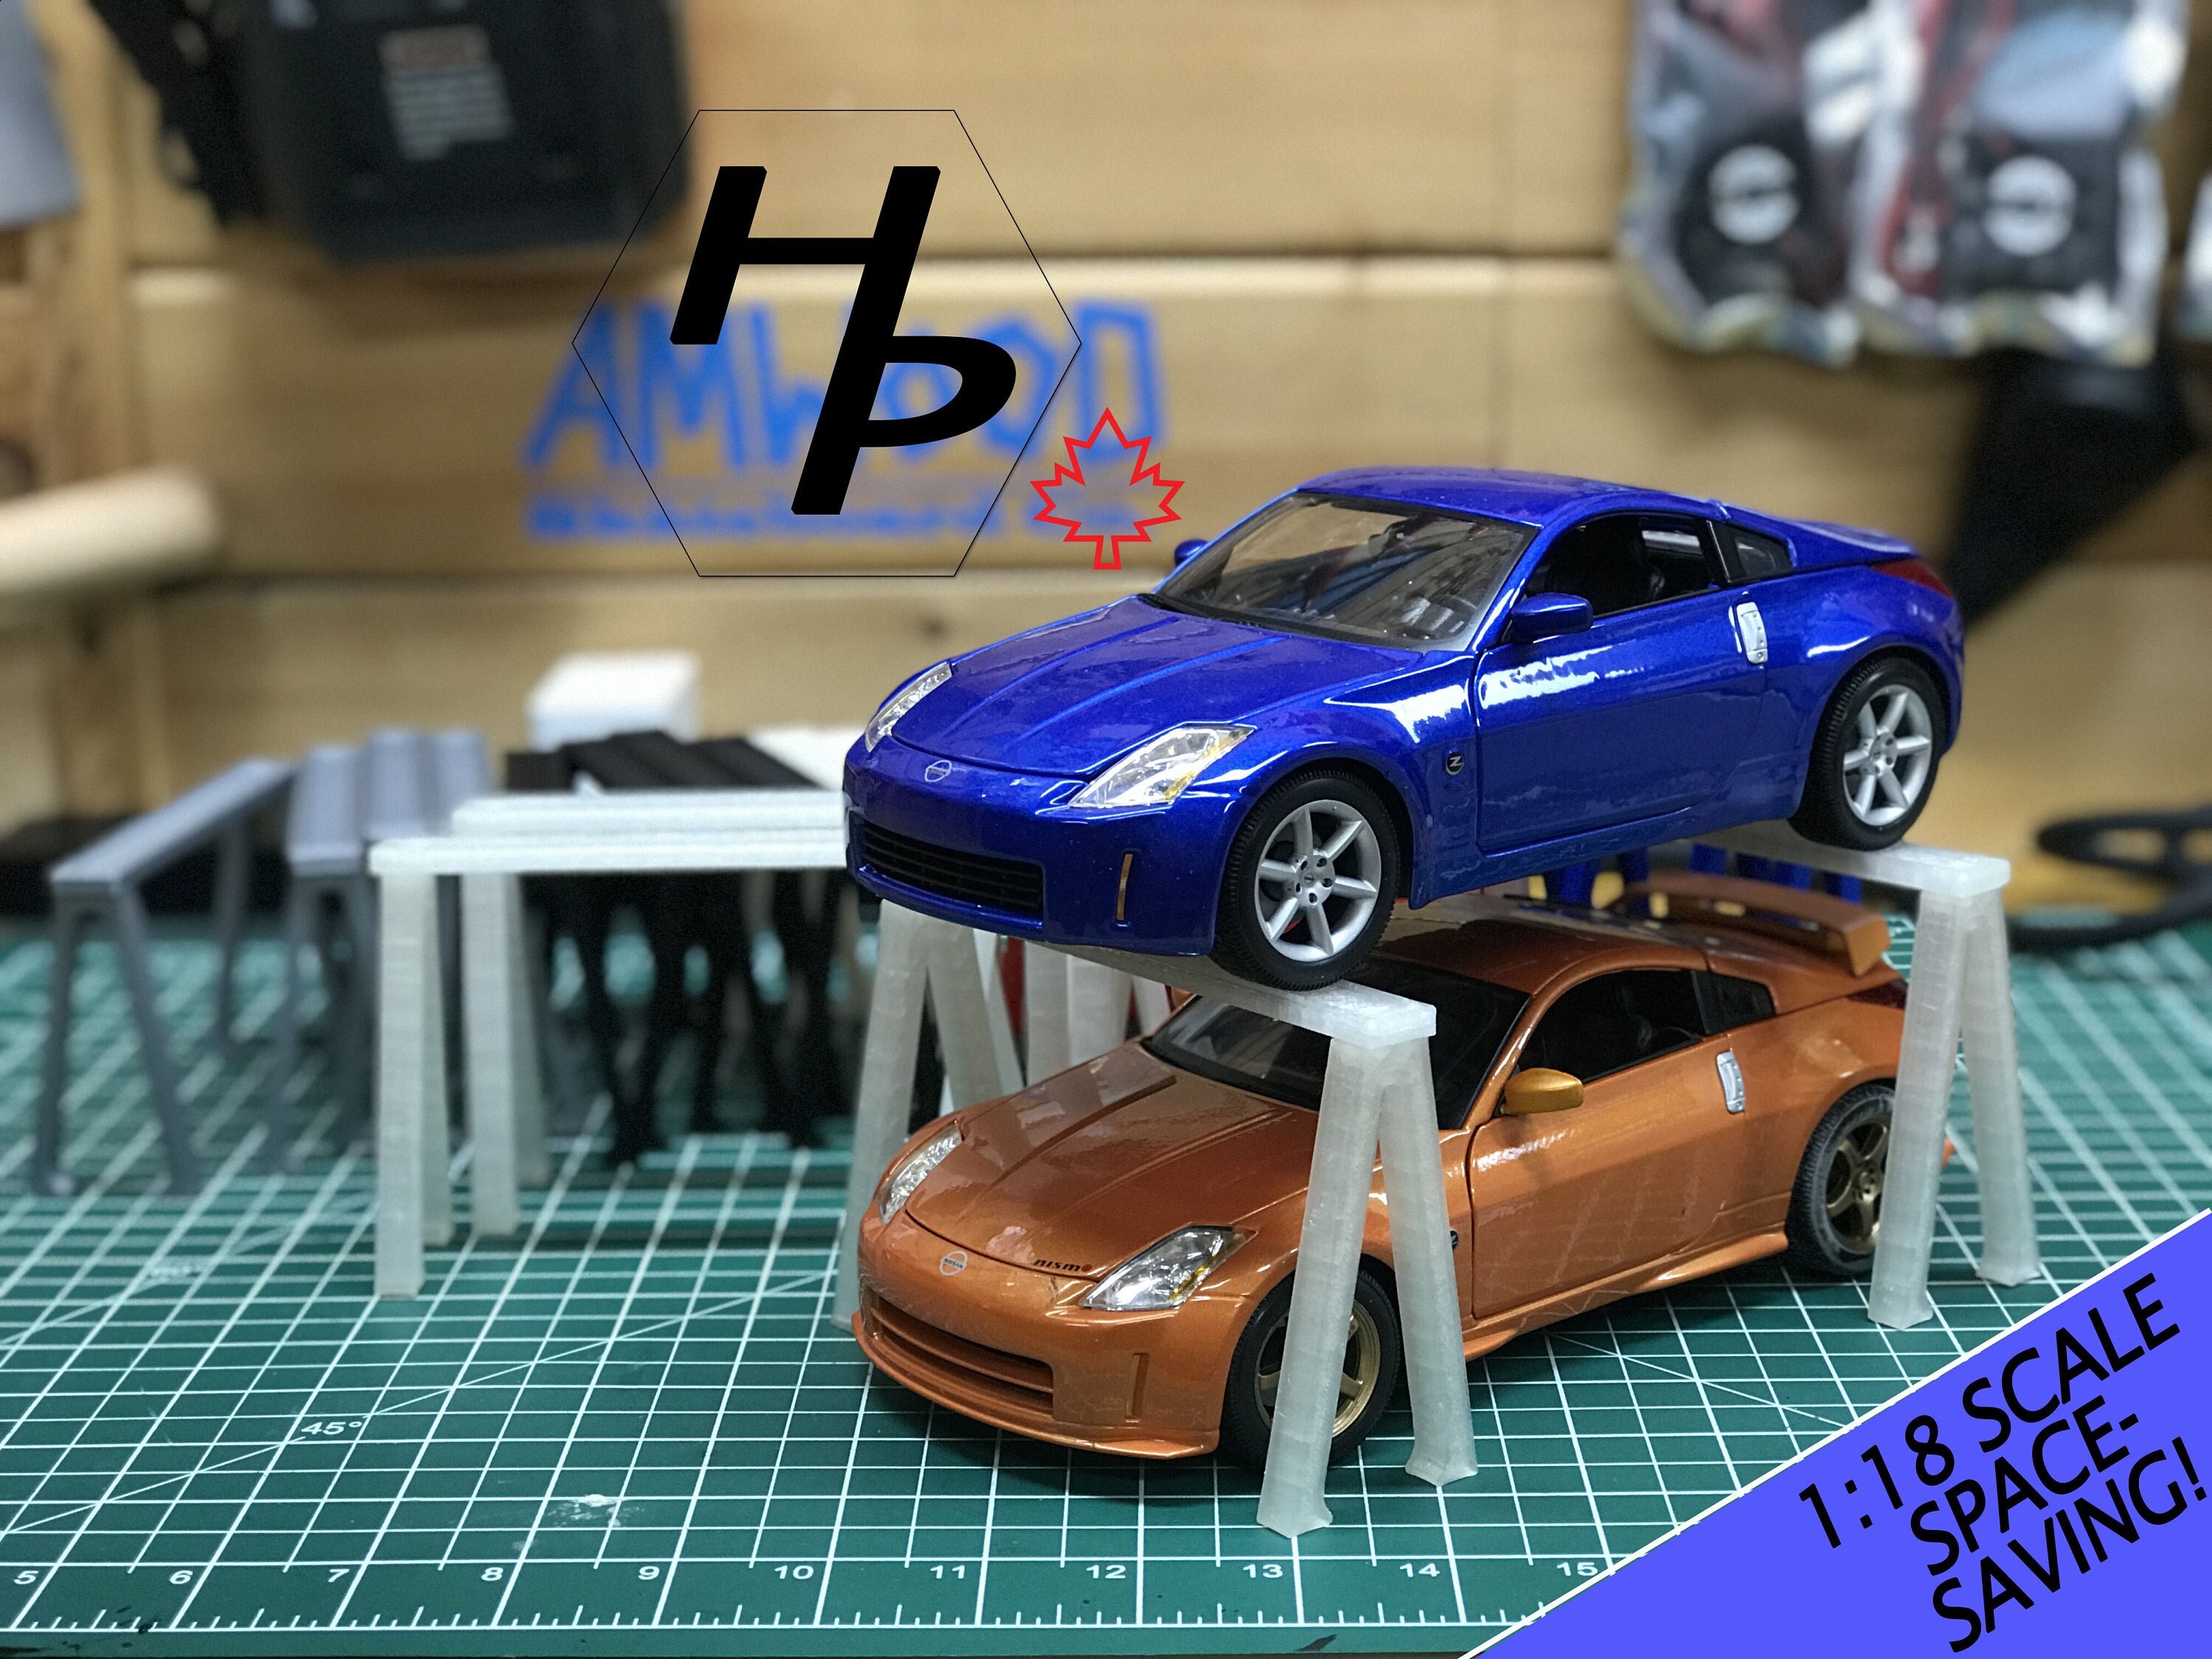 Buy 1 18 Scale Model Car Online In India -  India